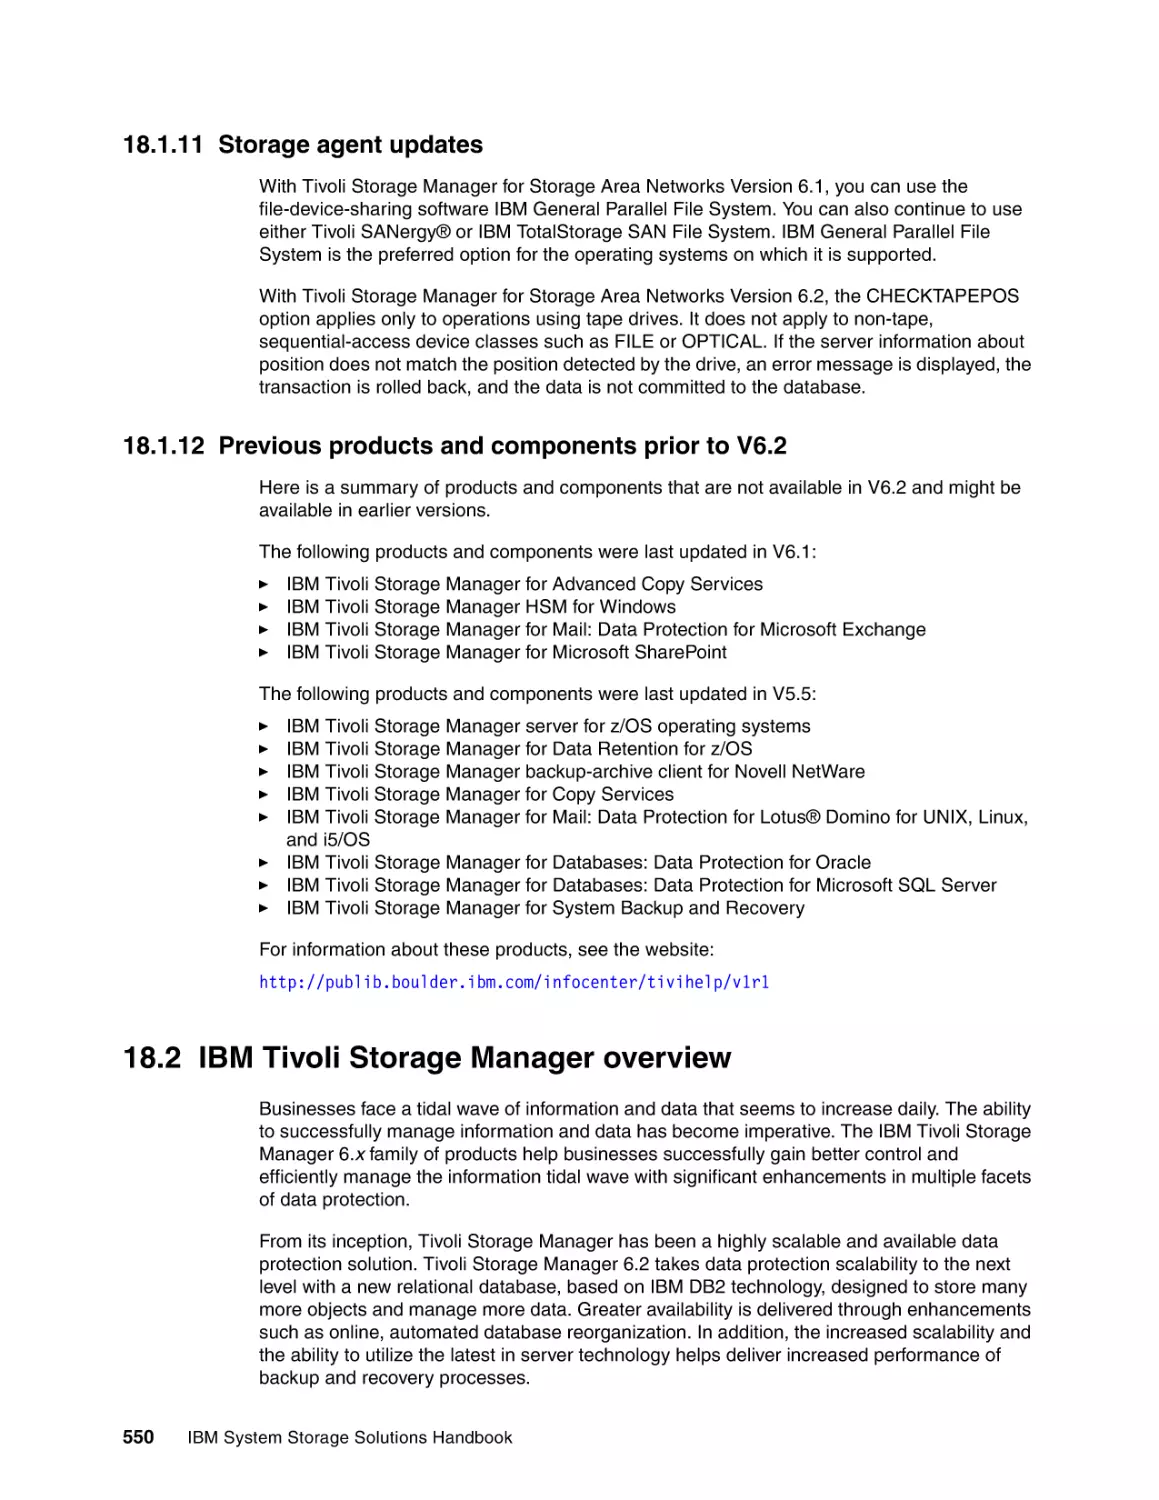 18.1.11 Storage agent updates
18.1.12 Previous products and components prior to V6.2
18.2 IBM Tivoli Storage Manager overview